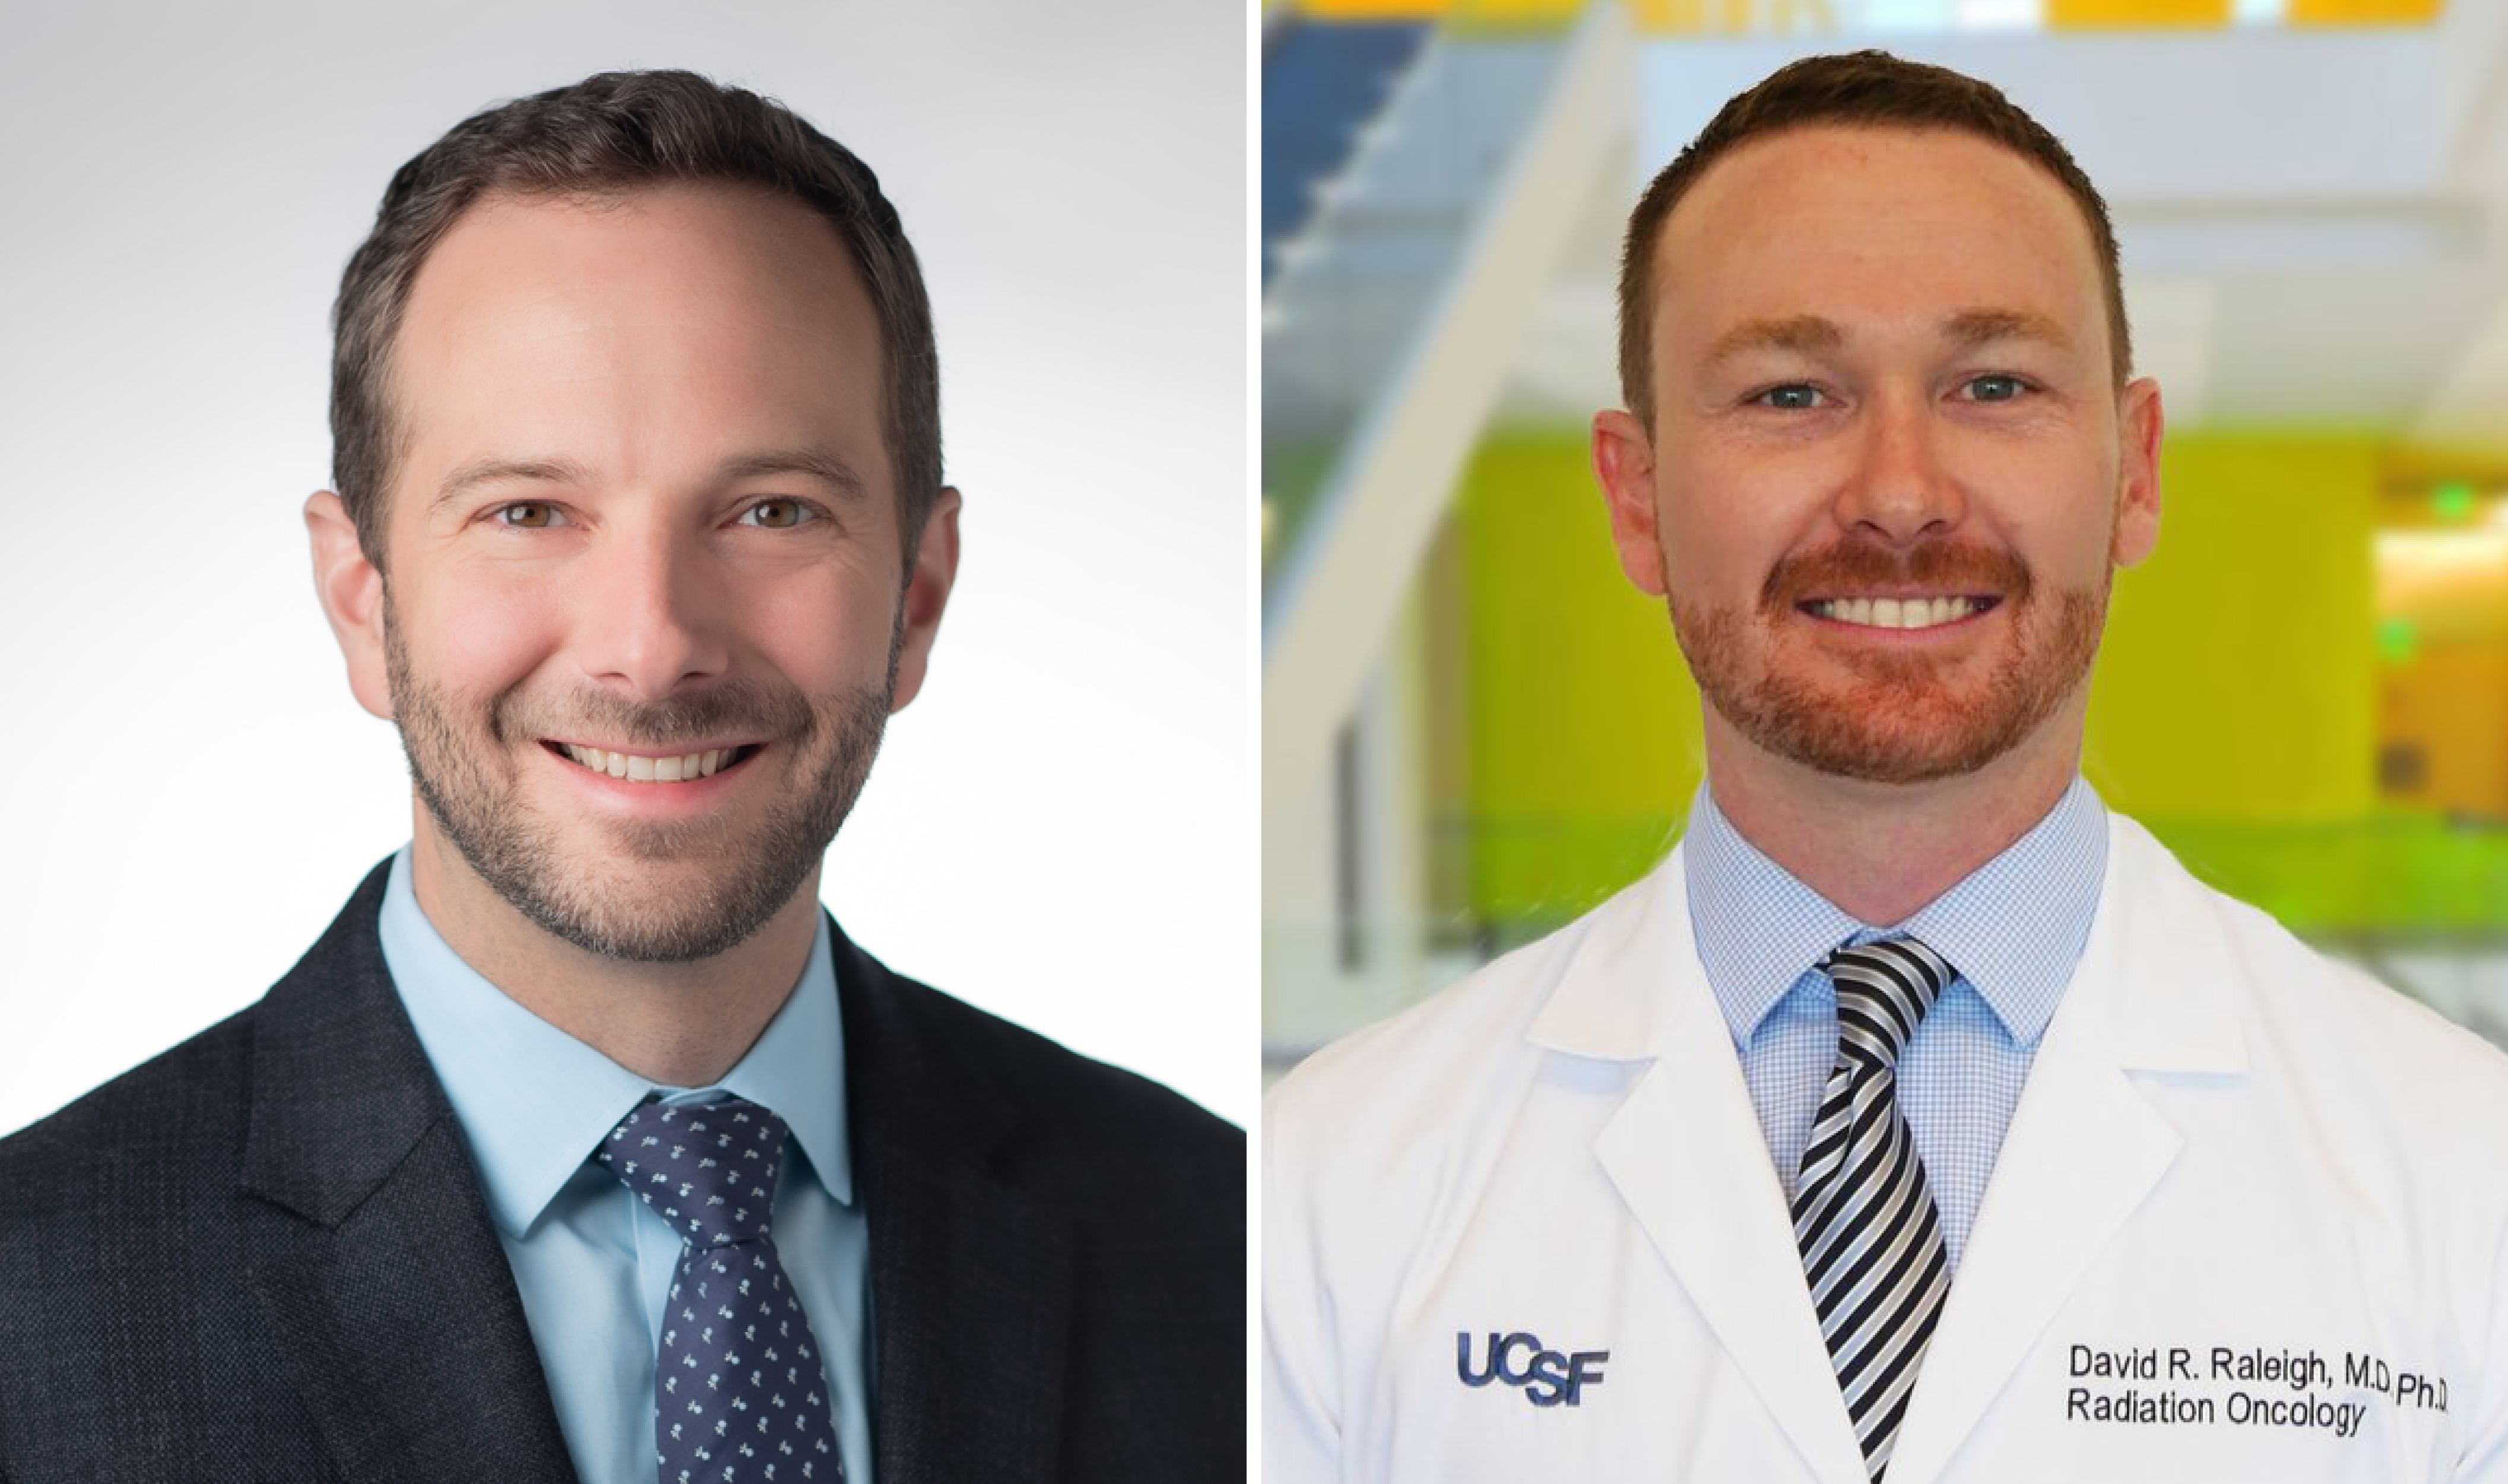 Stephen Magill, MD, PhD (left) and David Raleigh, MD, PhD (right)